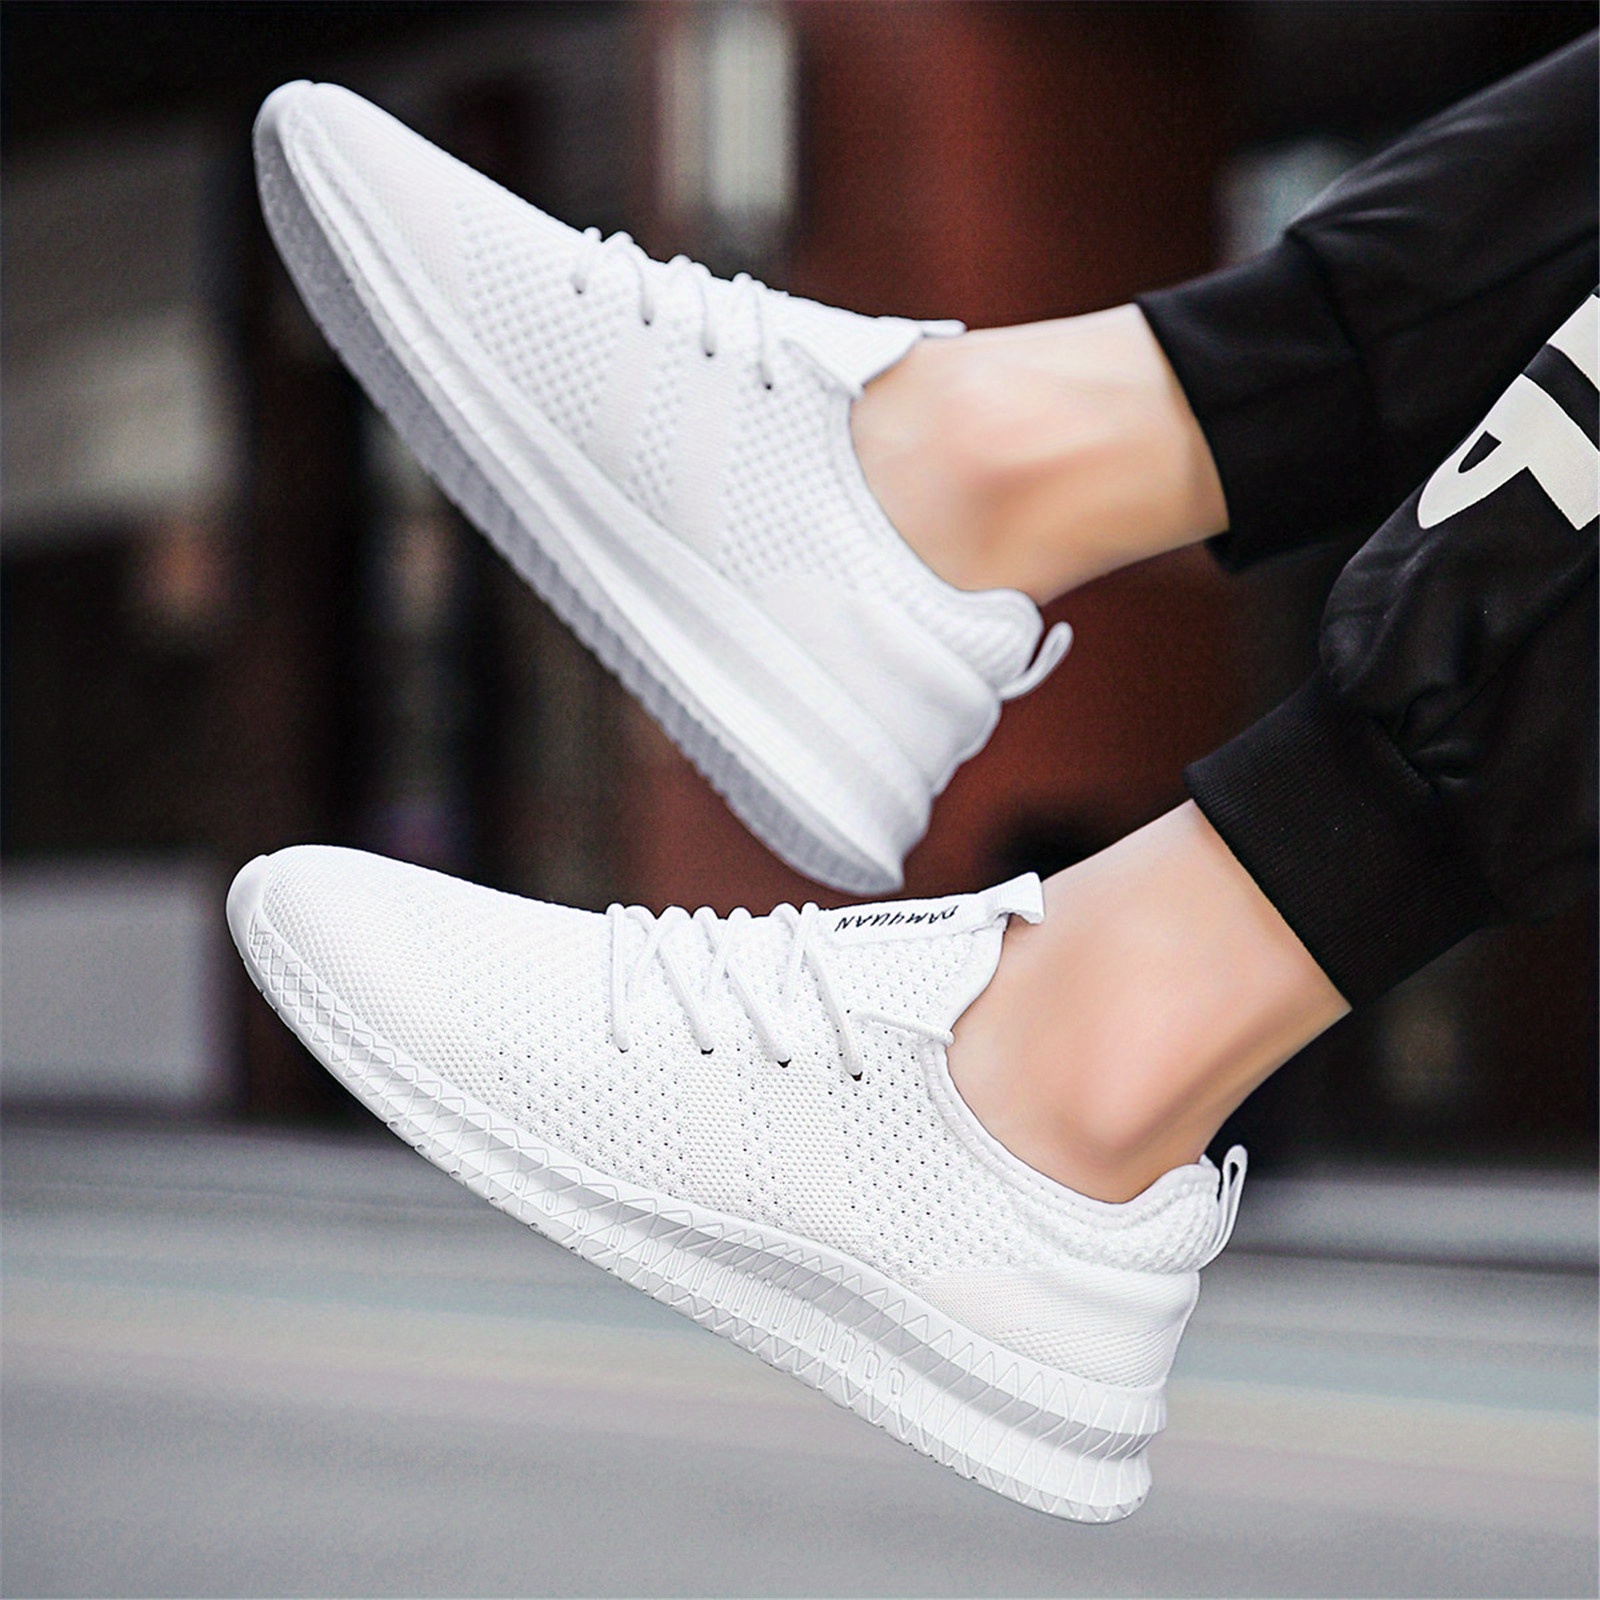 mens trendy breathable lace up knit sneakers with assorted colors casual outdoor running walking shoes details 9